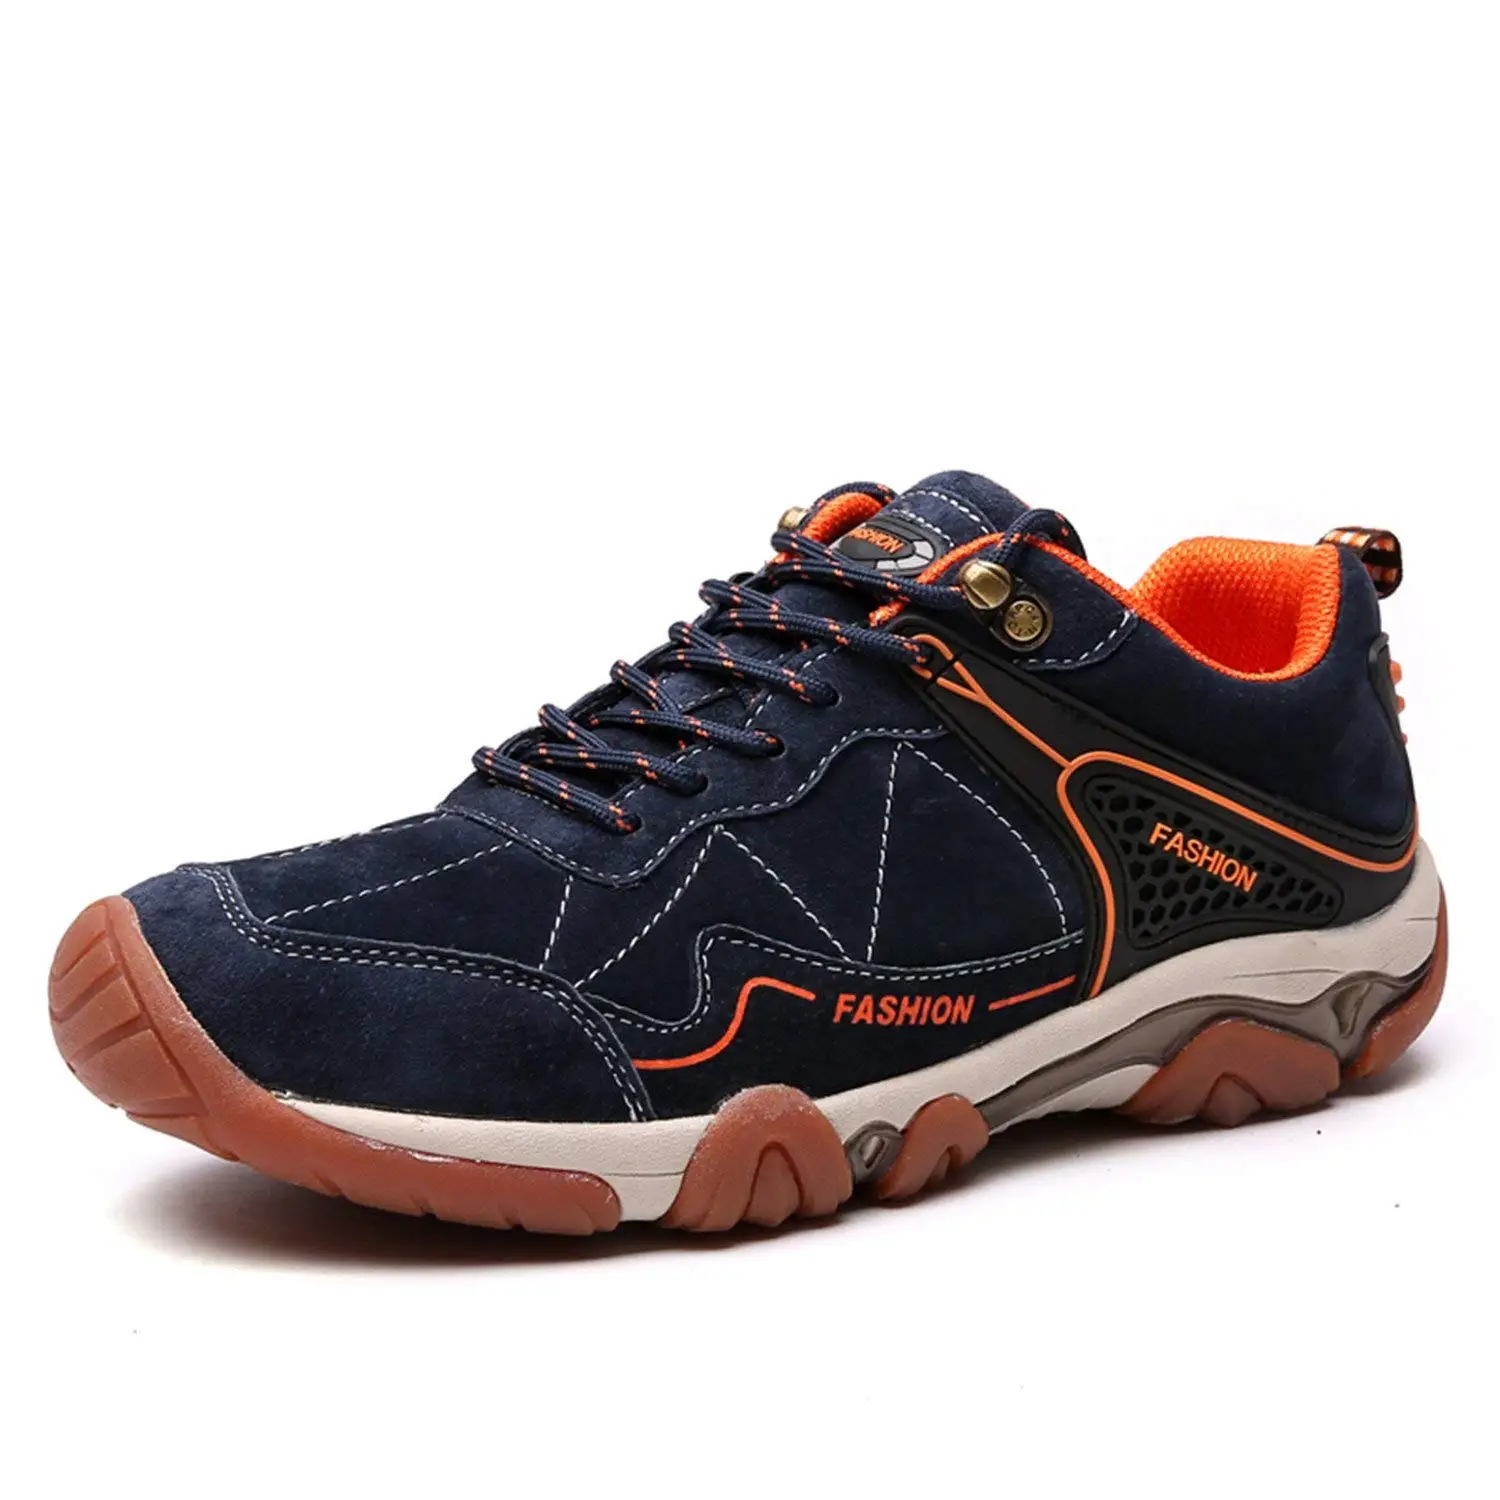 Cheap Solomon Hiking Shoes, find Solomon Hiking Shoes deals on line at ...